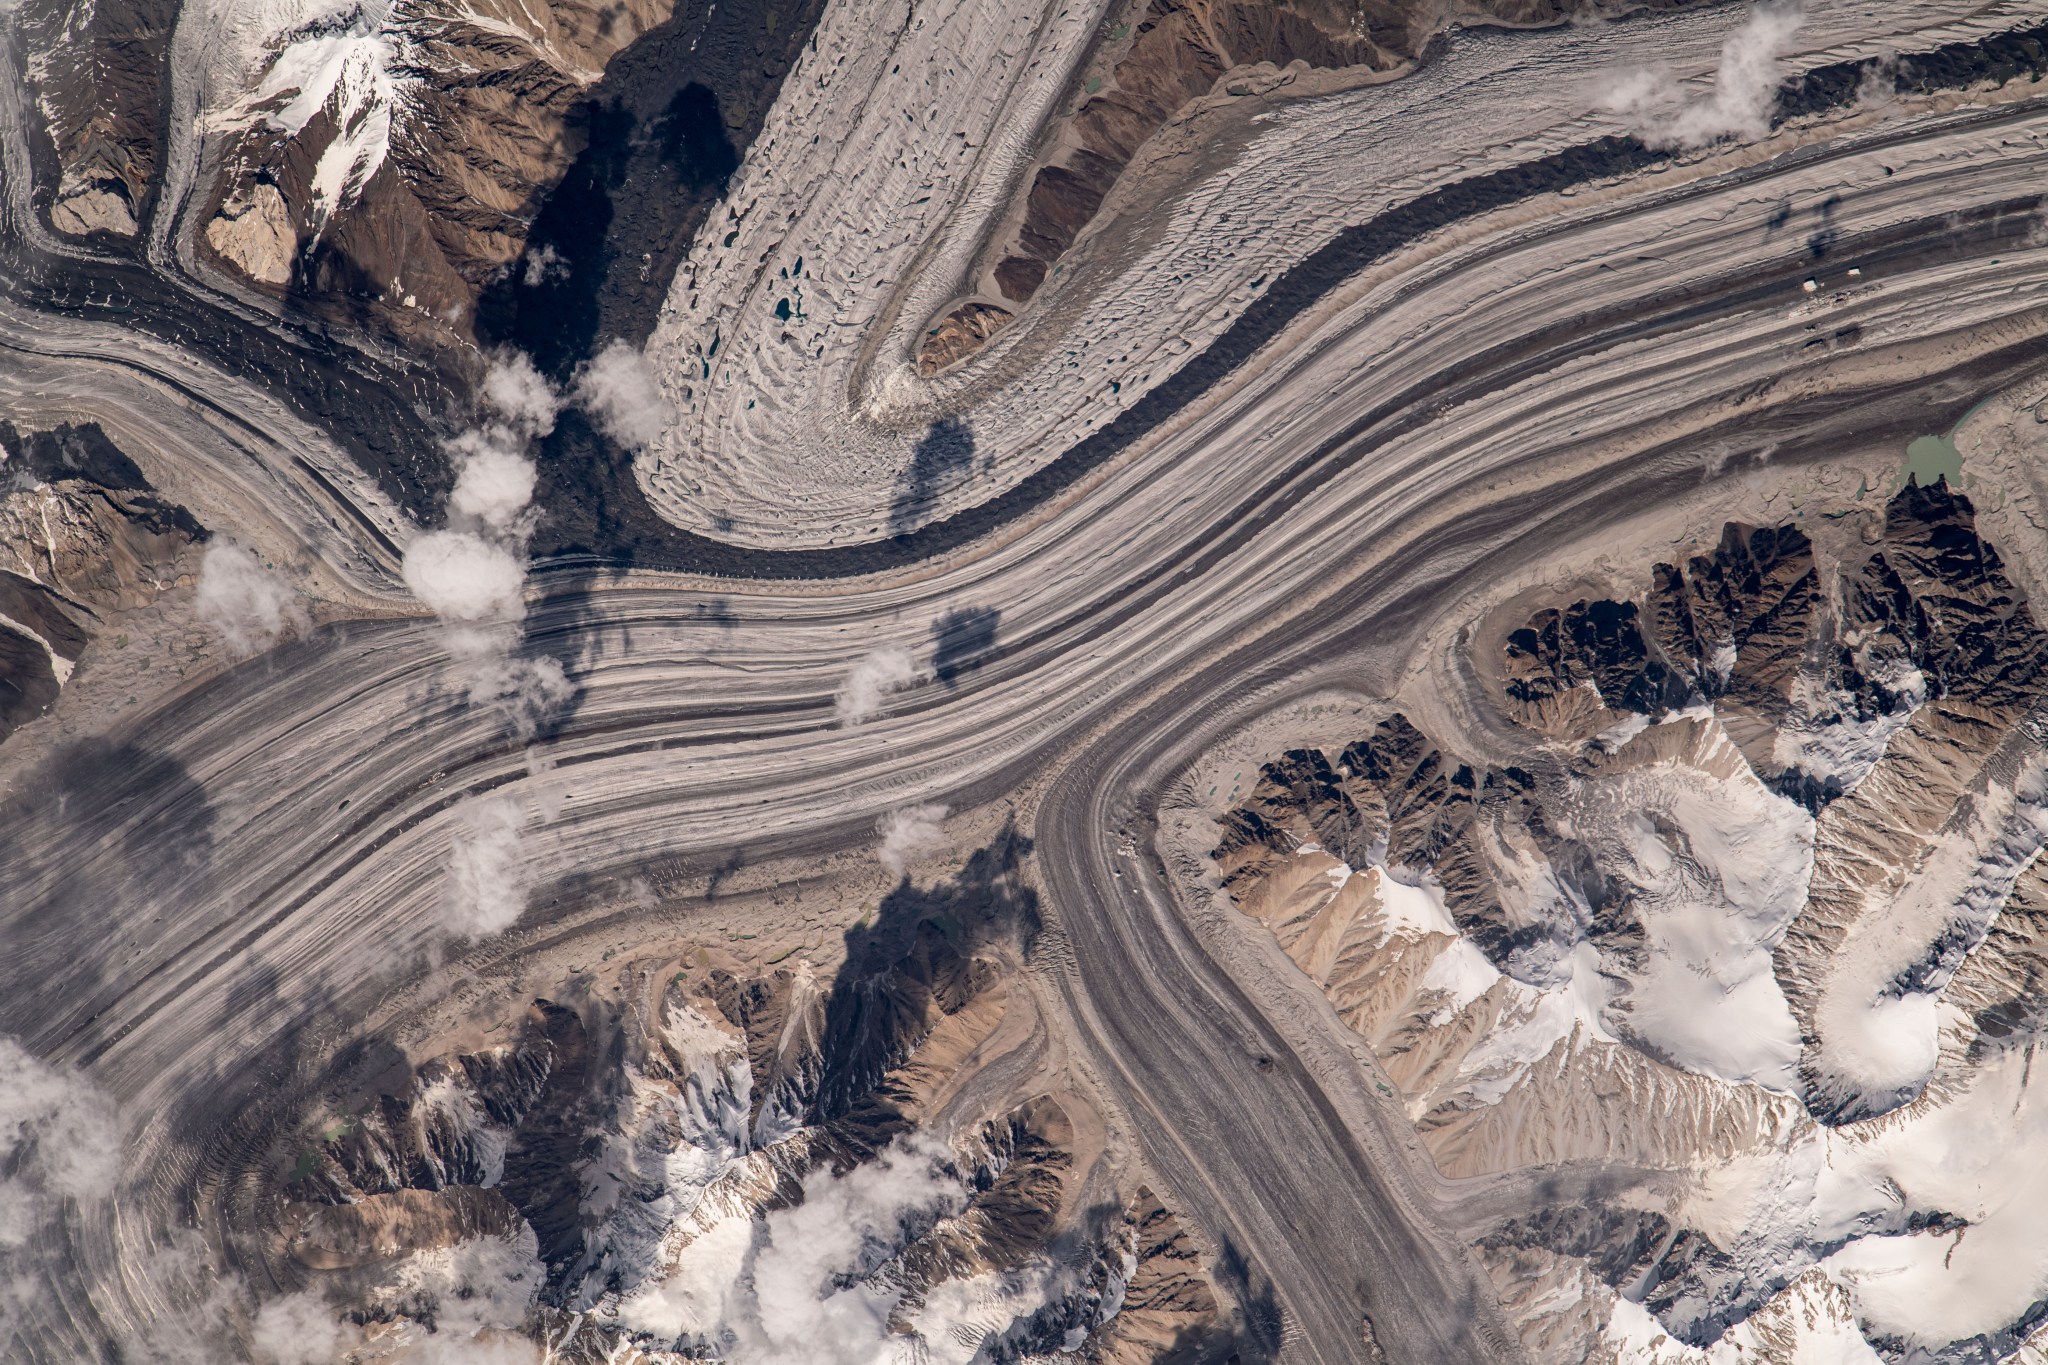 A view of mountains from the International Space Station. There are lines in various shades of gray that look like highways - these are paths carved by glaciers moving through the mountain range. Several peaks around the lines are untouched. A few clouds dot the sky at middle left and bottom left.